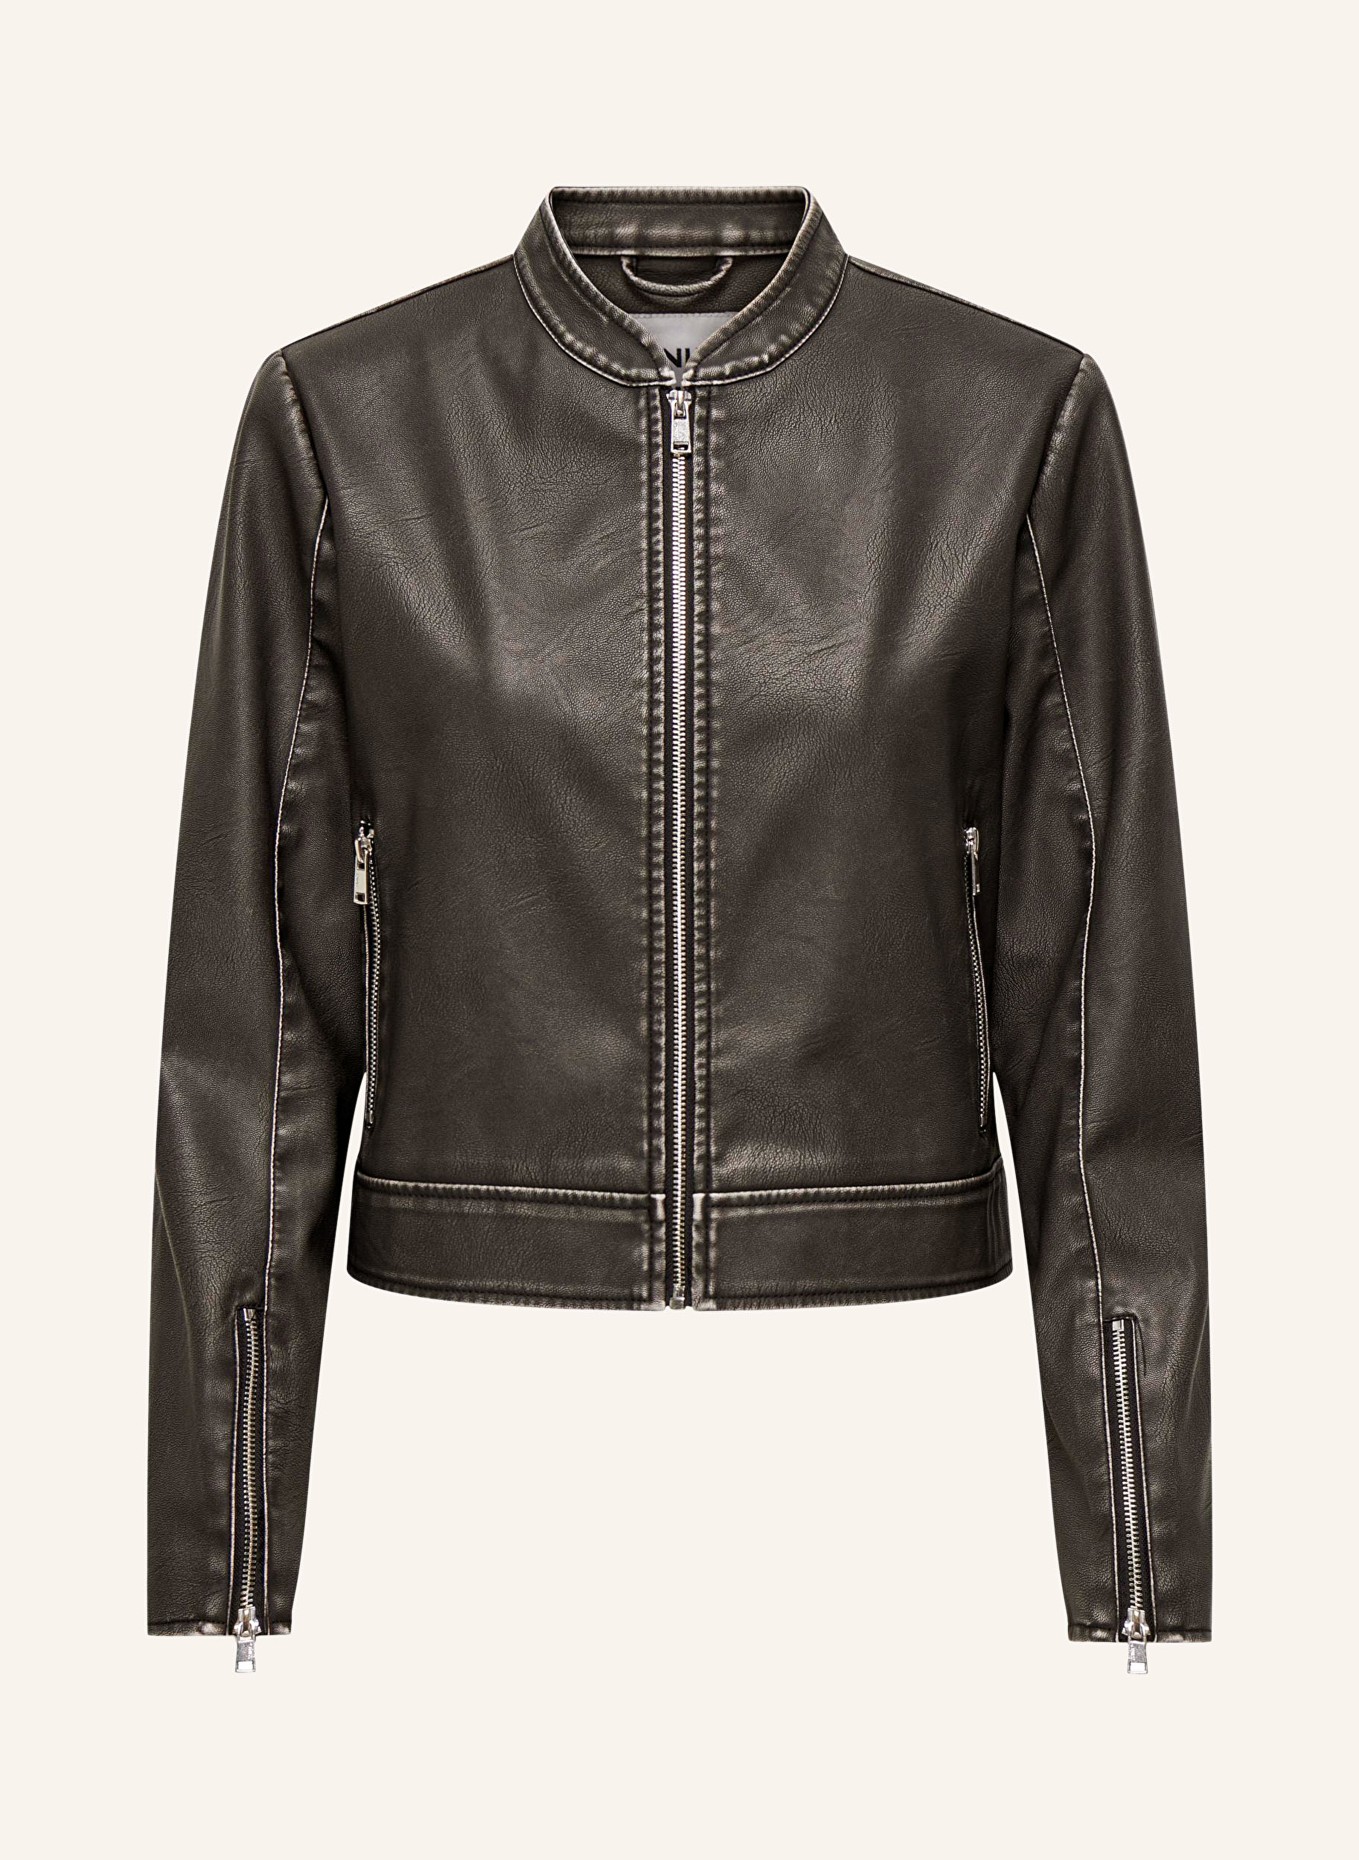 ONLY Jacket in leather look, Color: BLACK (Image 1)